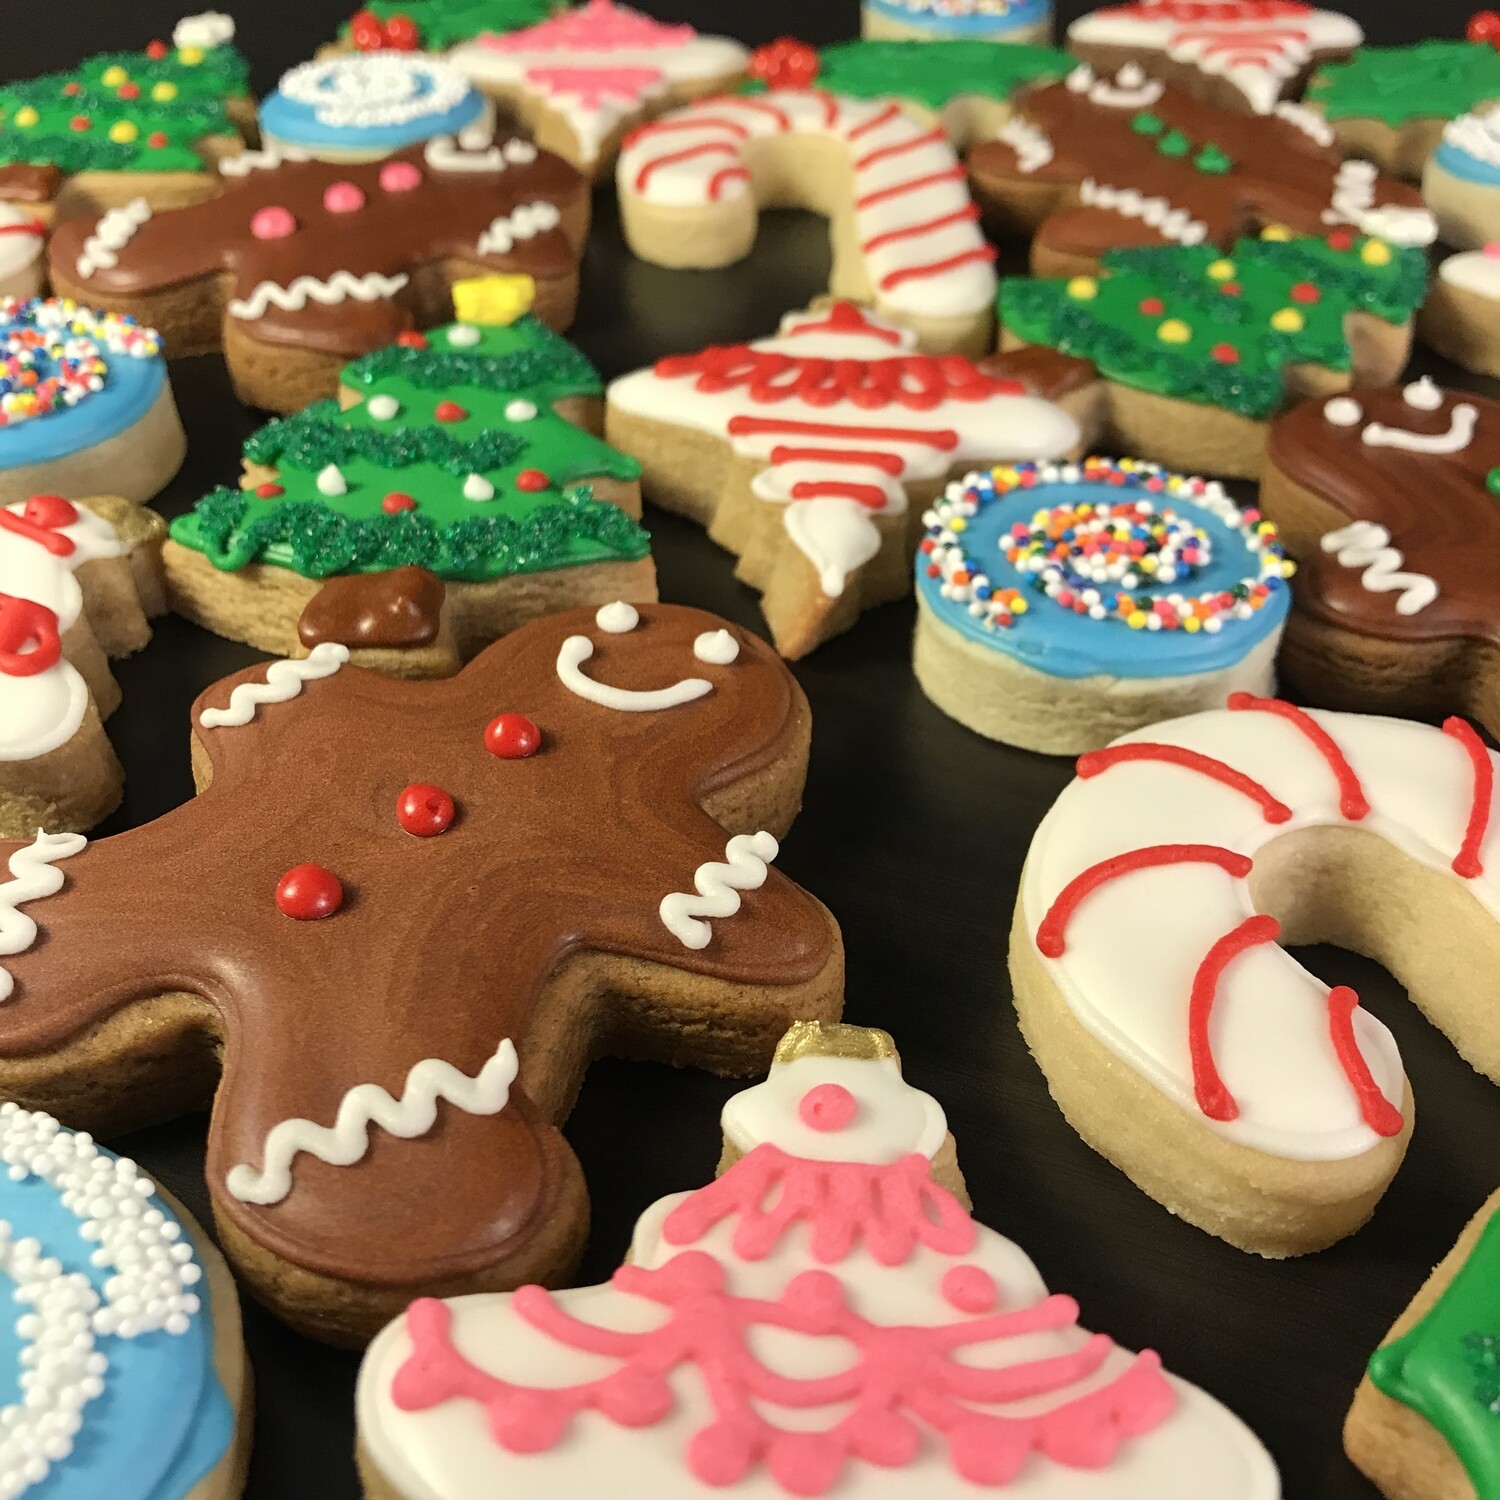 'Gingerbread Man Christmas Decorating Workshop - MONDAY, NOVEMBER 23rd at 6:30 p.m. (THE COOKIE DECORATING STUDIO)